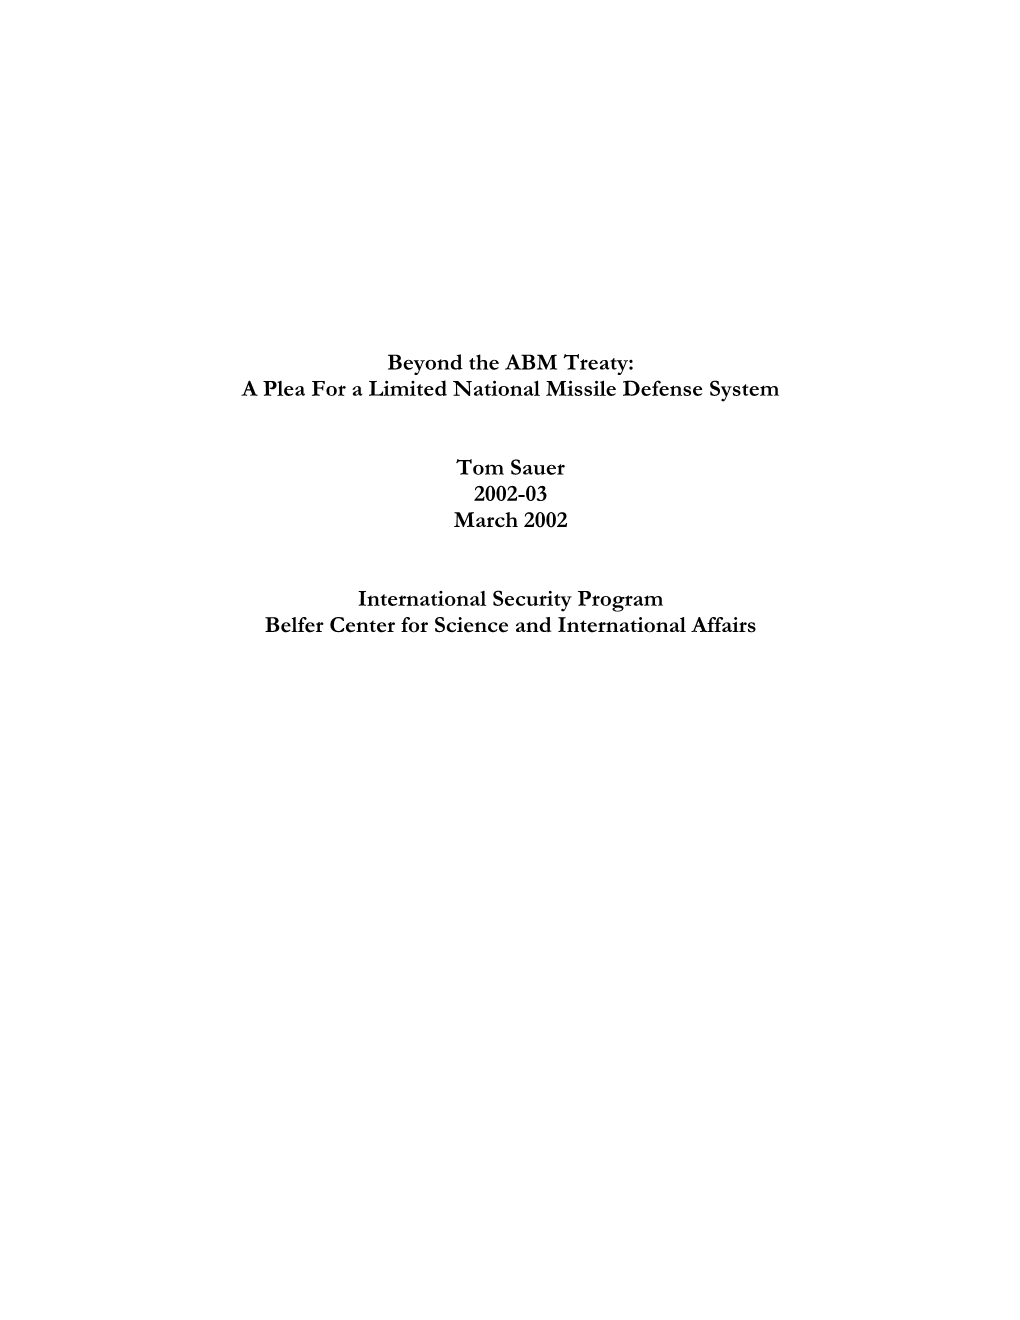 Paper 2002-03 of the Belfer Center for Science and International Affairs